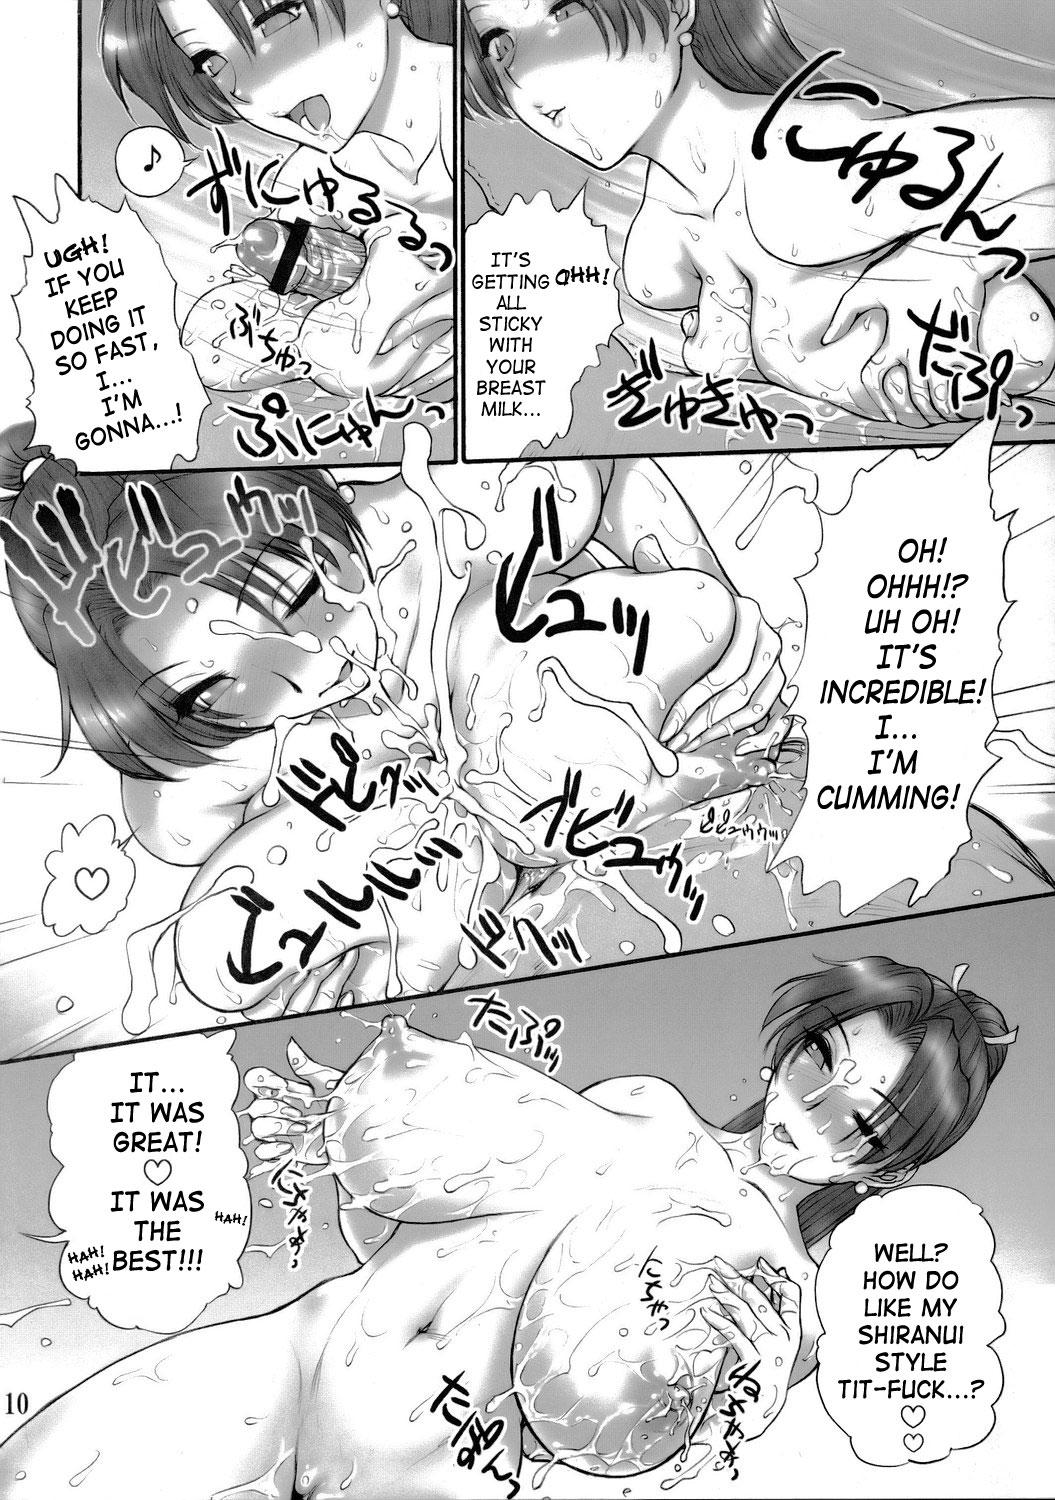 Taboo (SC29) [Shinnihon Pepsitou (St. Germain-sal)] Report Concerning Kyoku-gen-ryuu (The King of Fighters) [English] [SaHa] - King of fighters Shower - Page 11